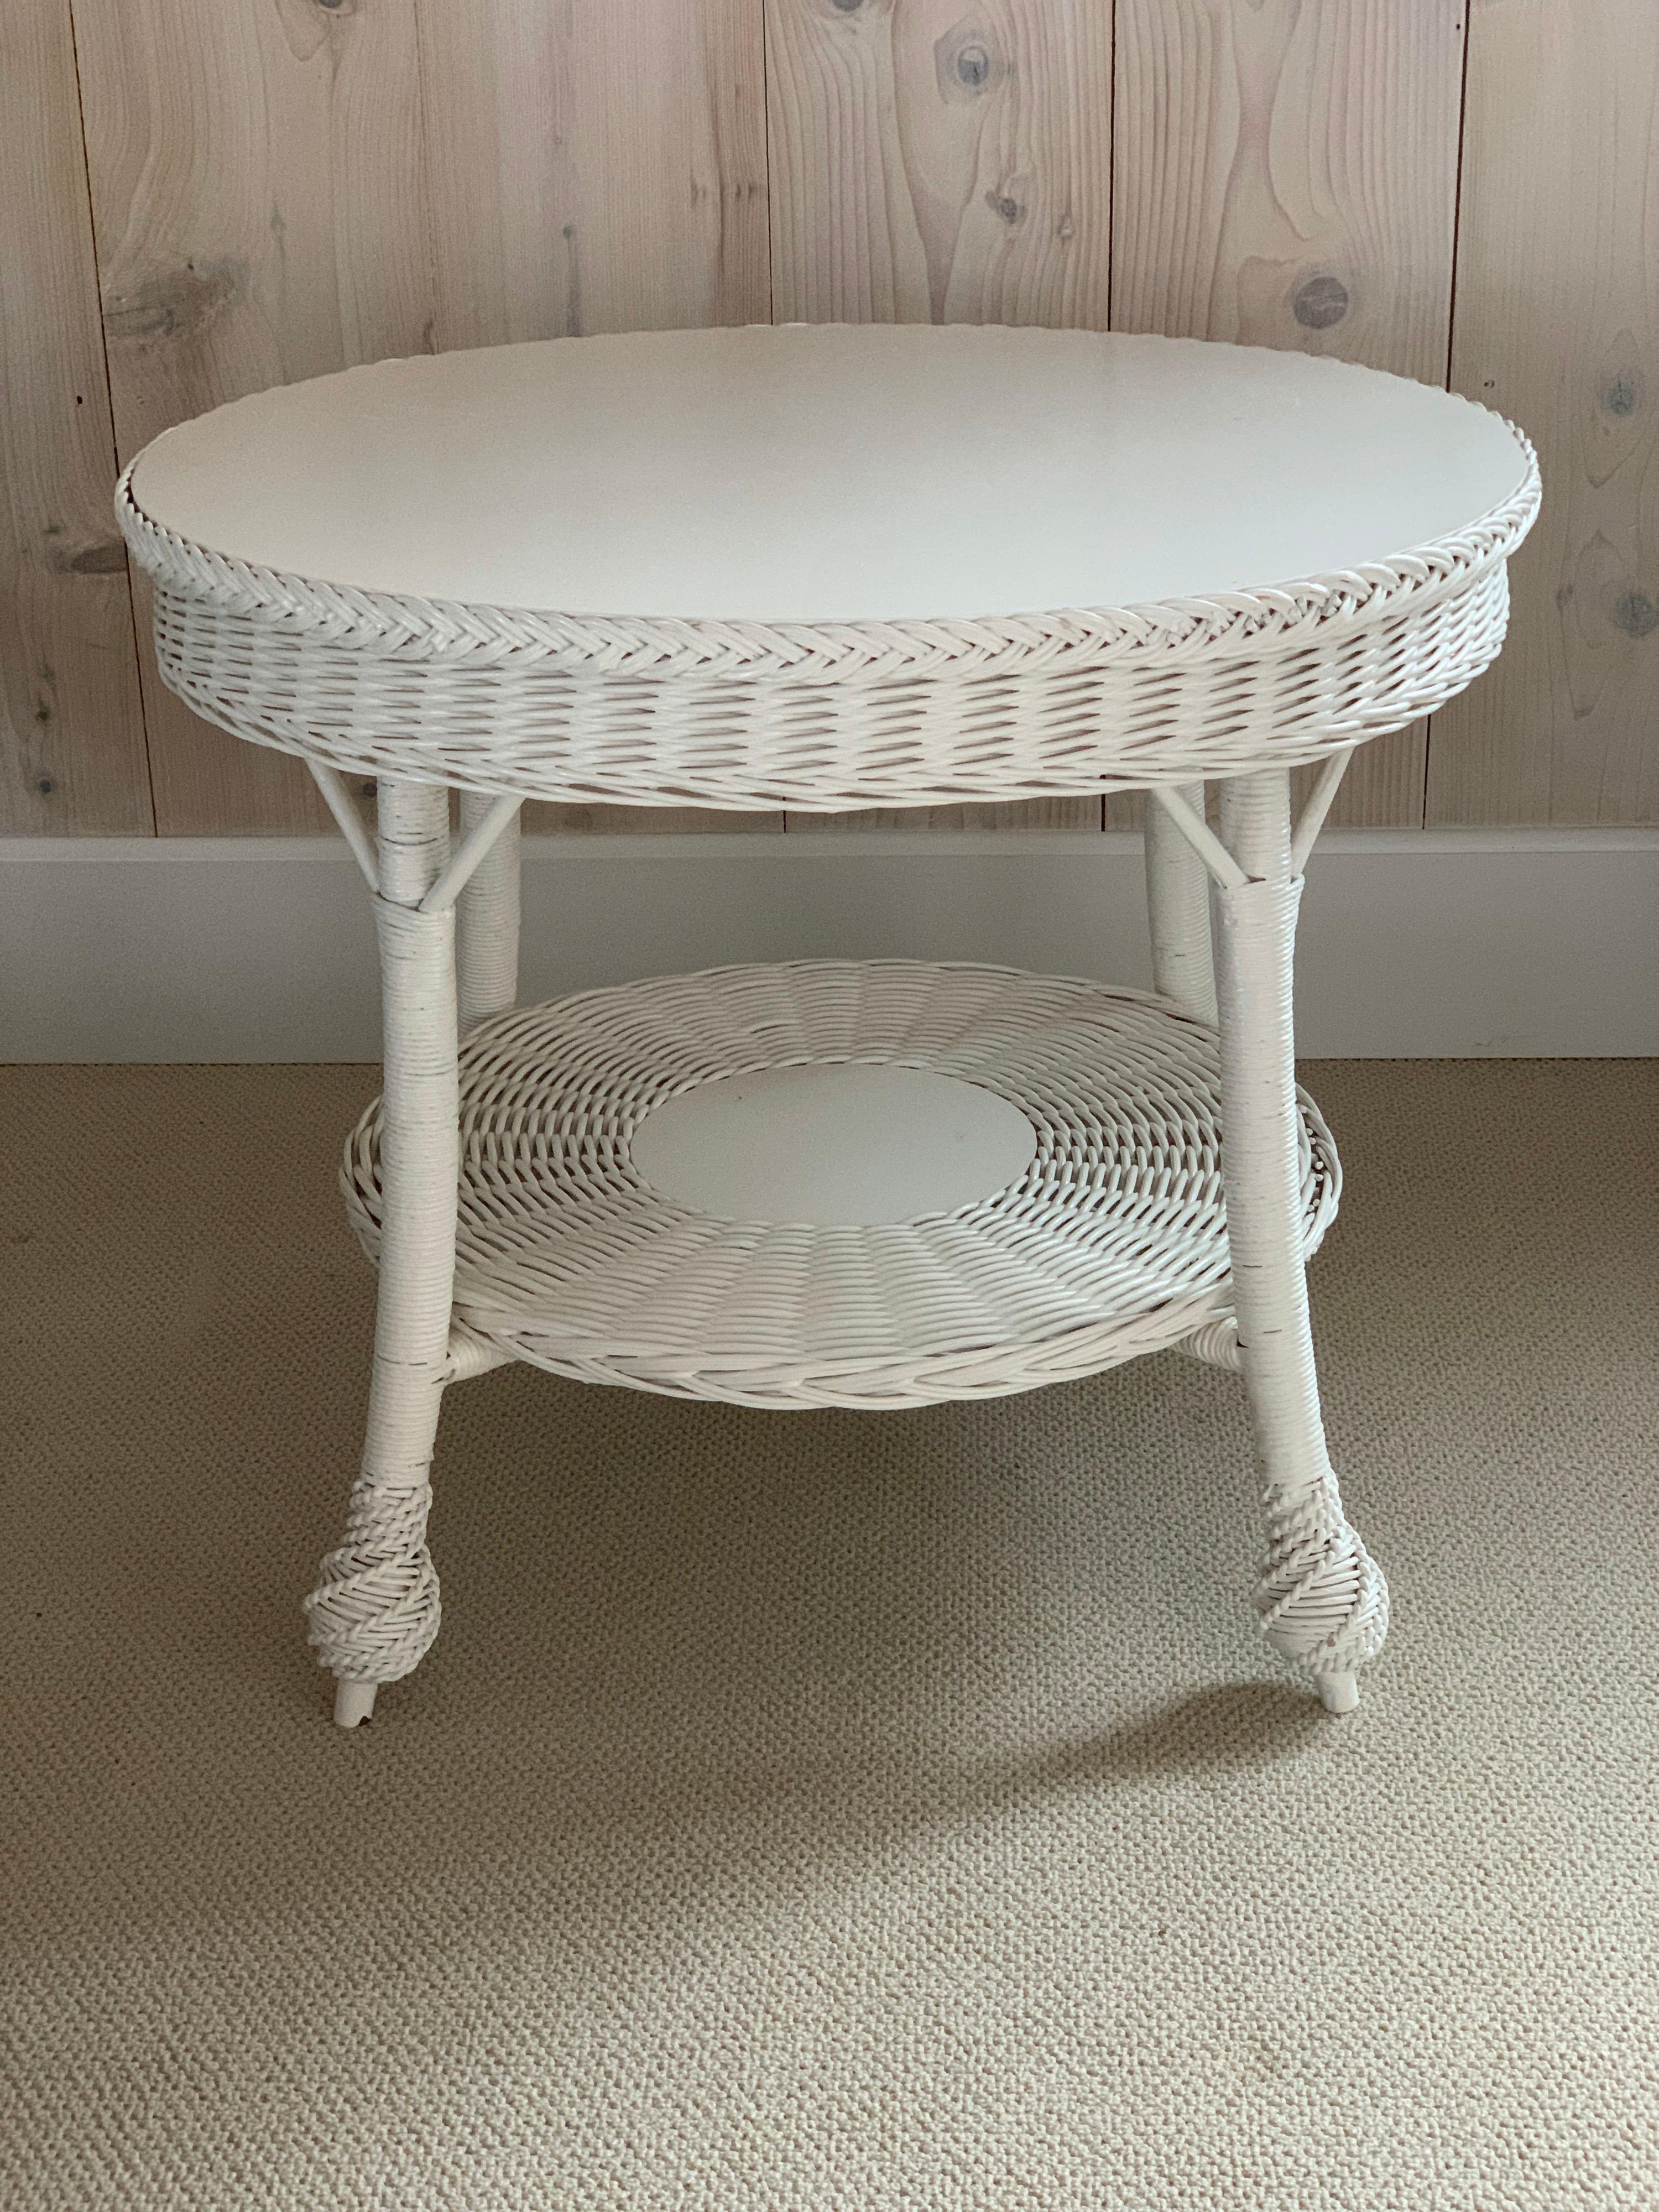 vintage round wicker table